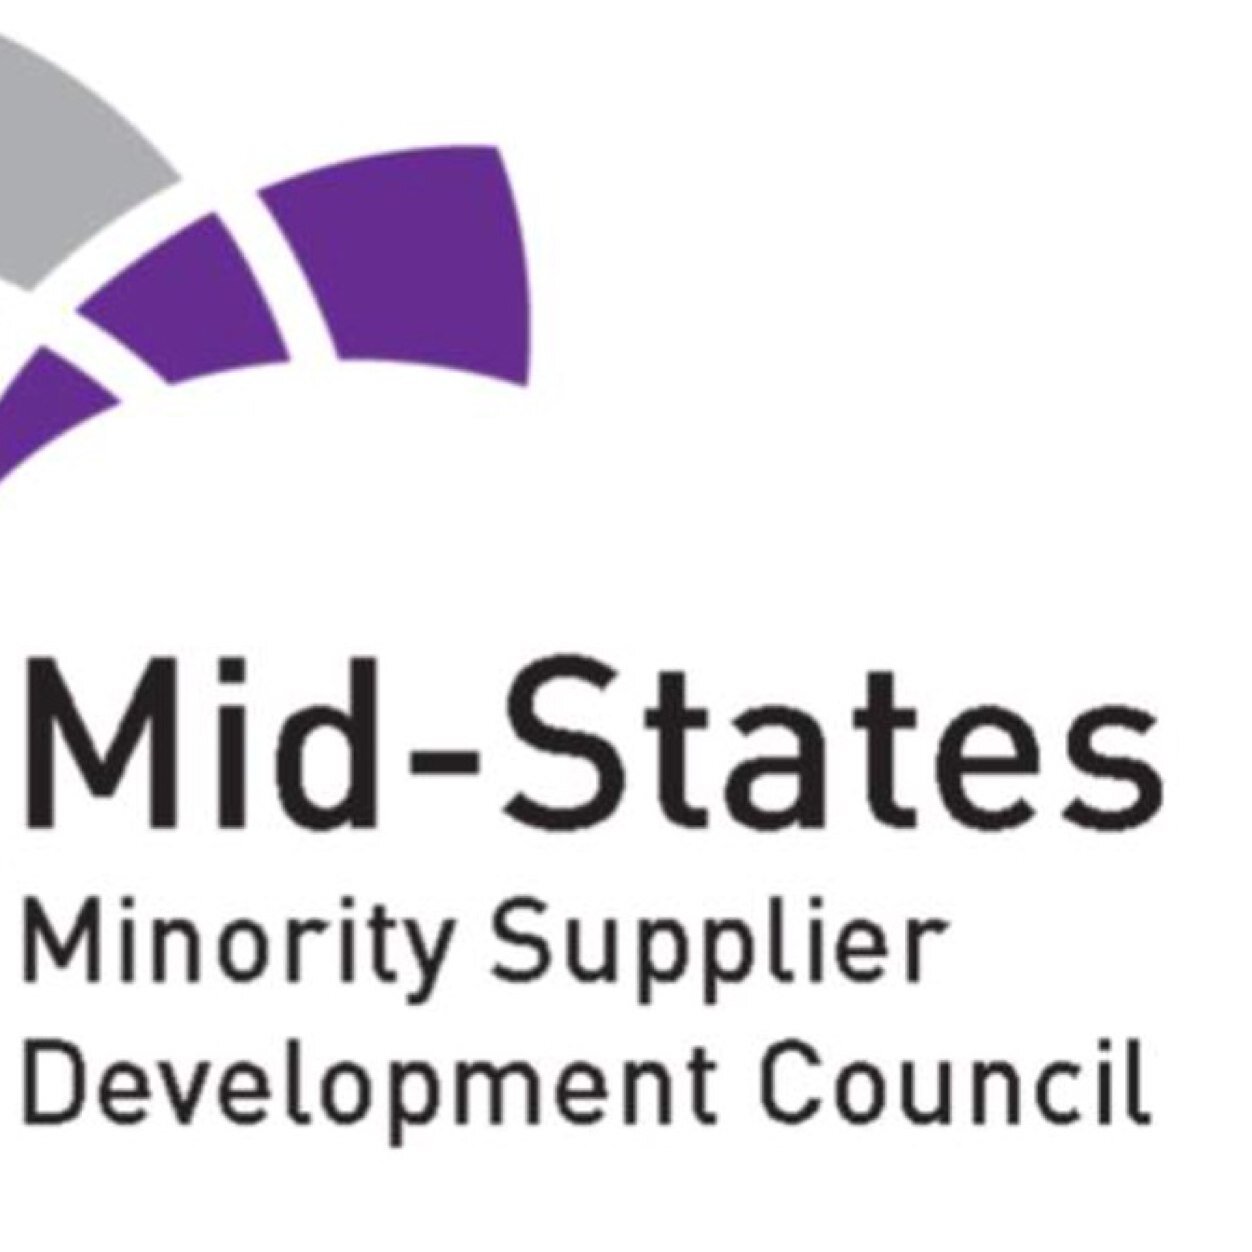 The primary mission of Mid-States MSDC is to promote and cultivate successful minority enterprises in Central IL, Indiana and Eastern MO